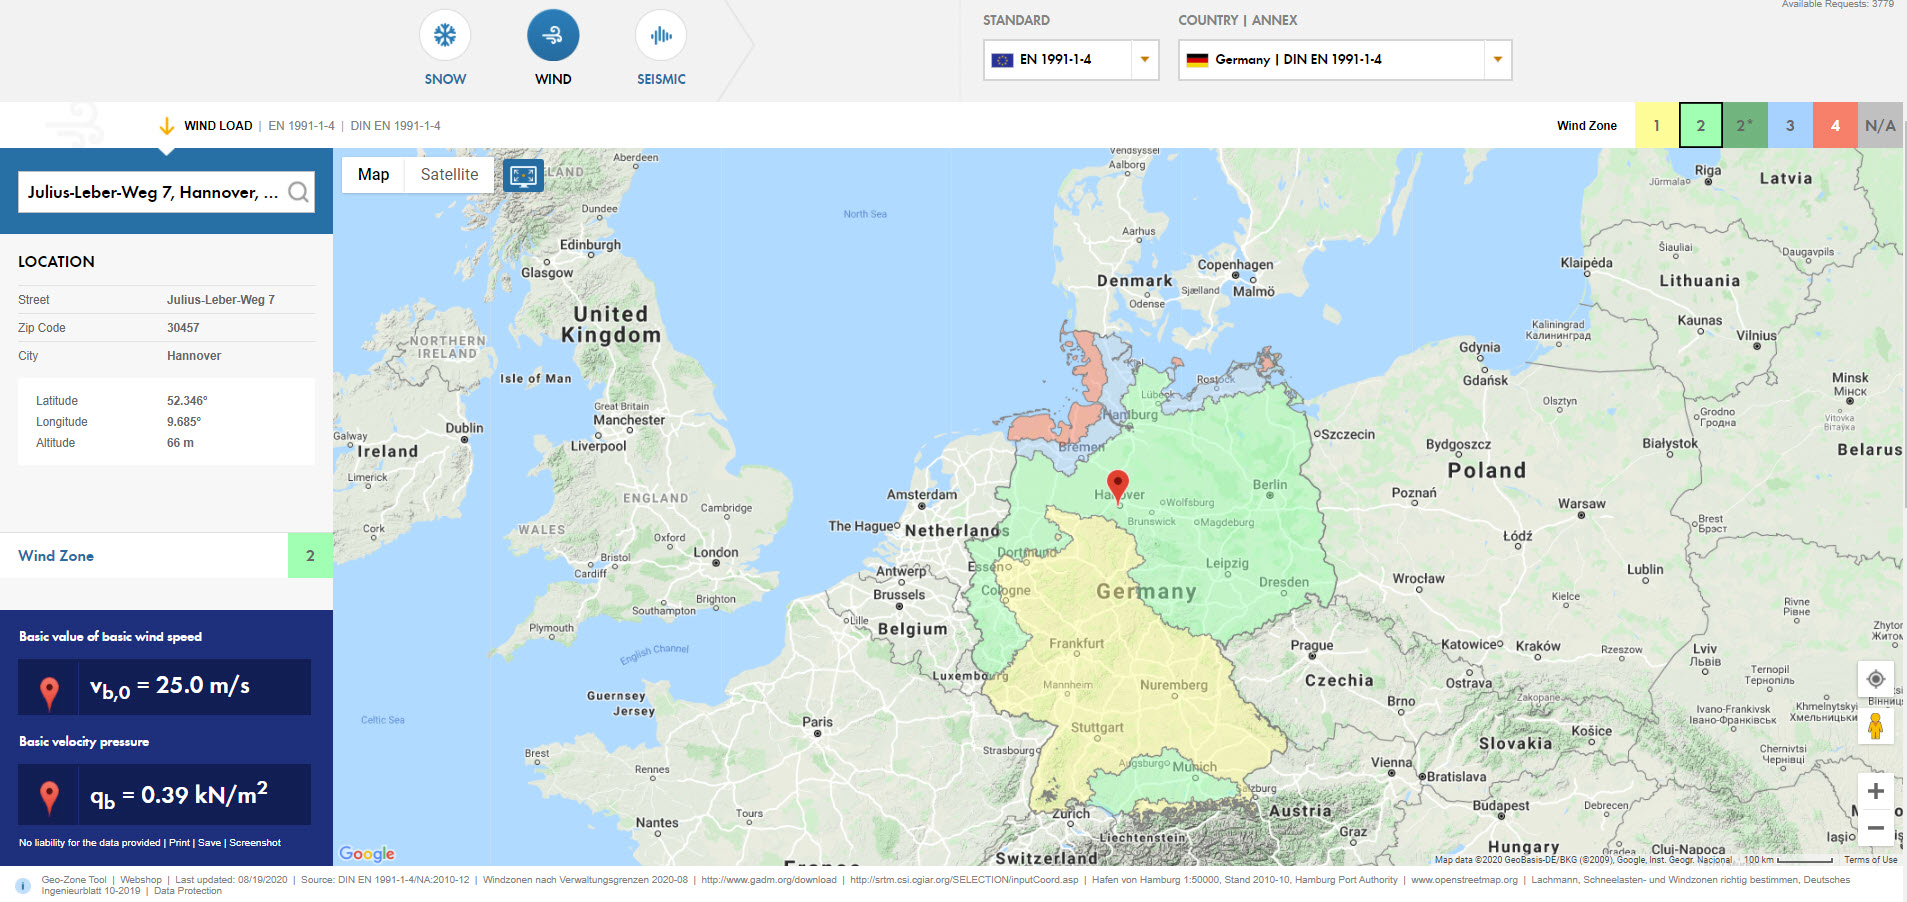 Dlubal Online Service to Determine Wind Loads Based on Cloud-Based Map Services